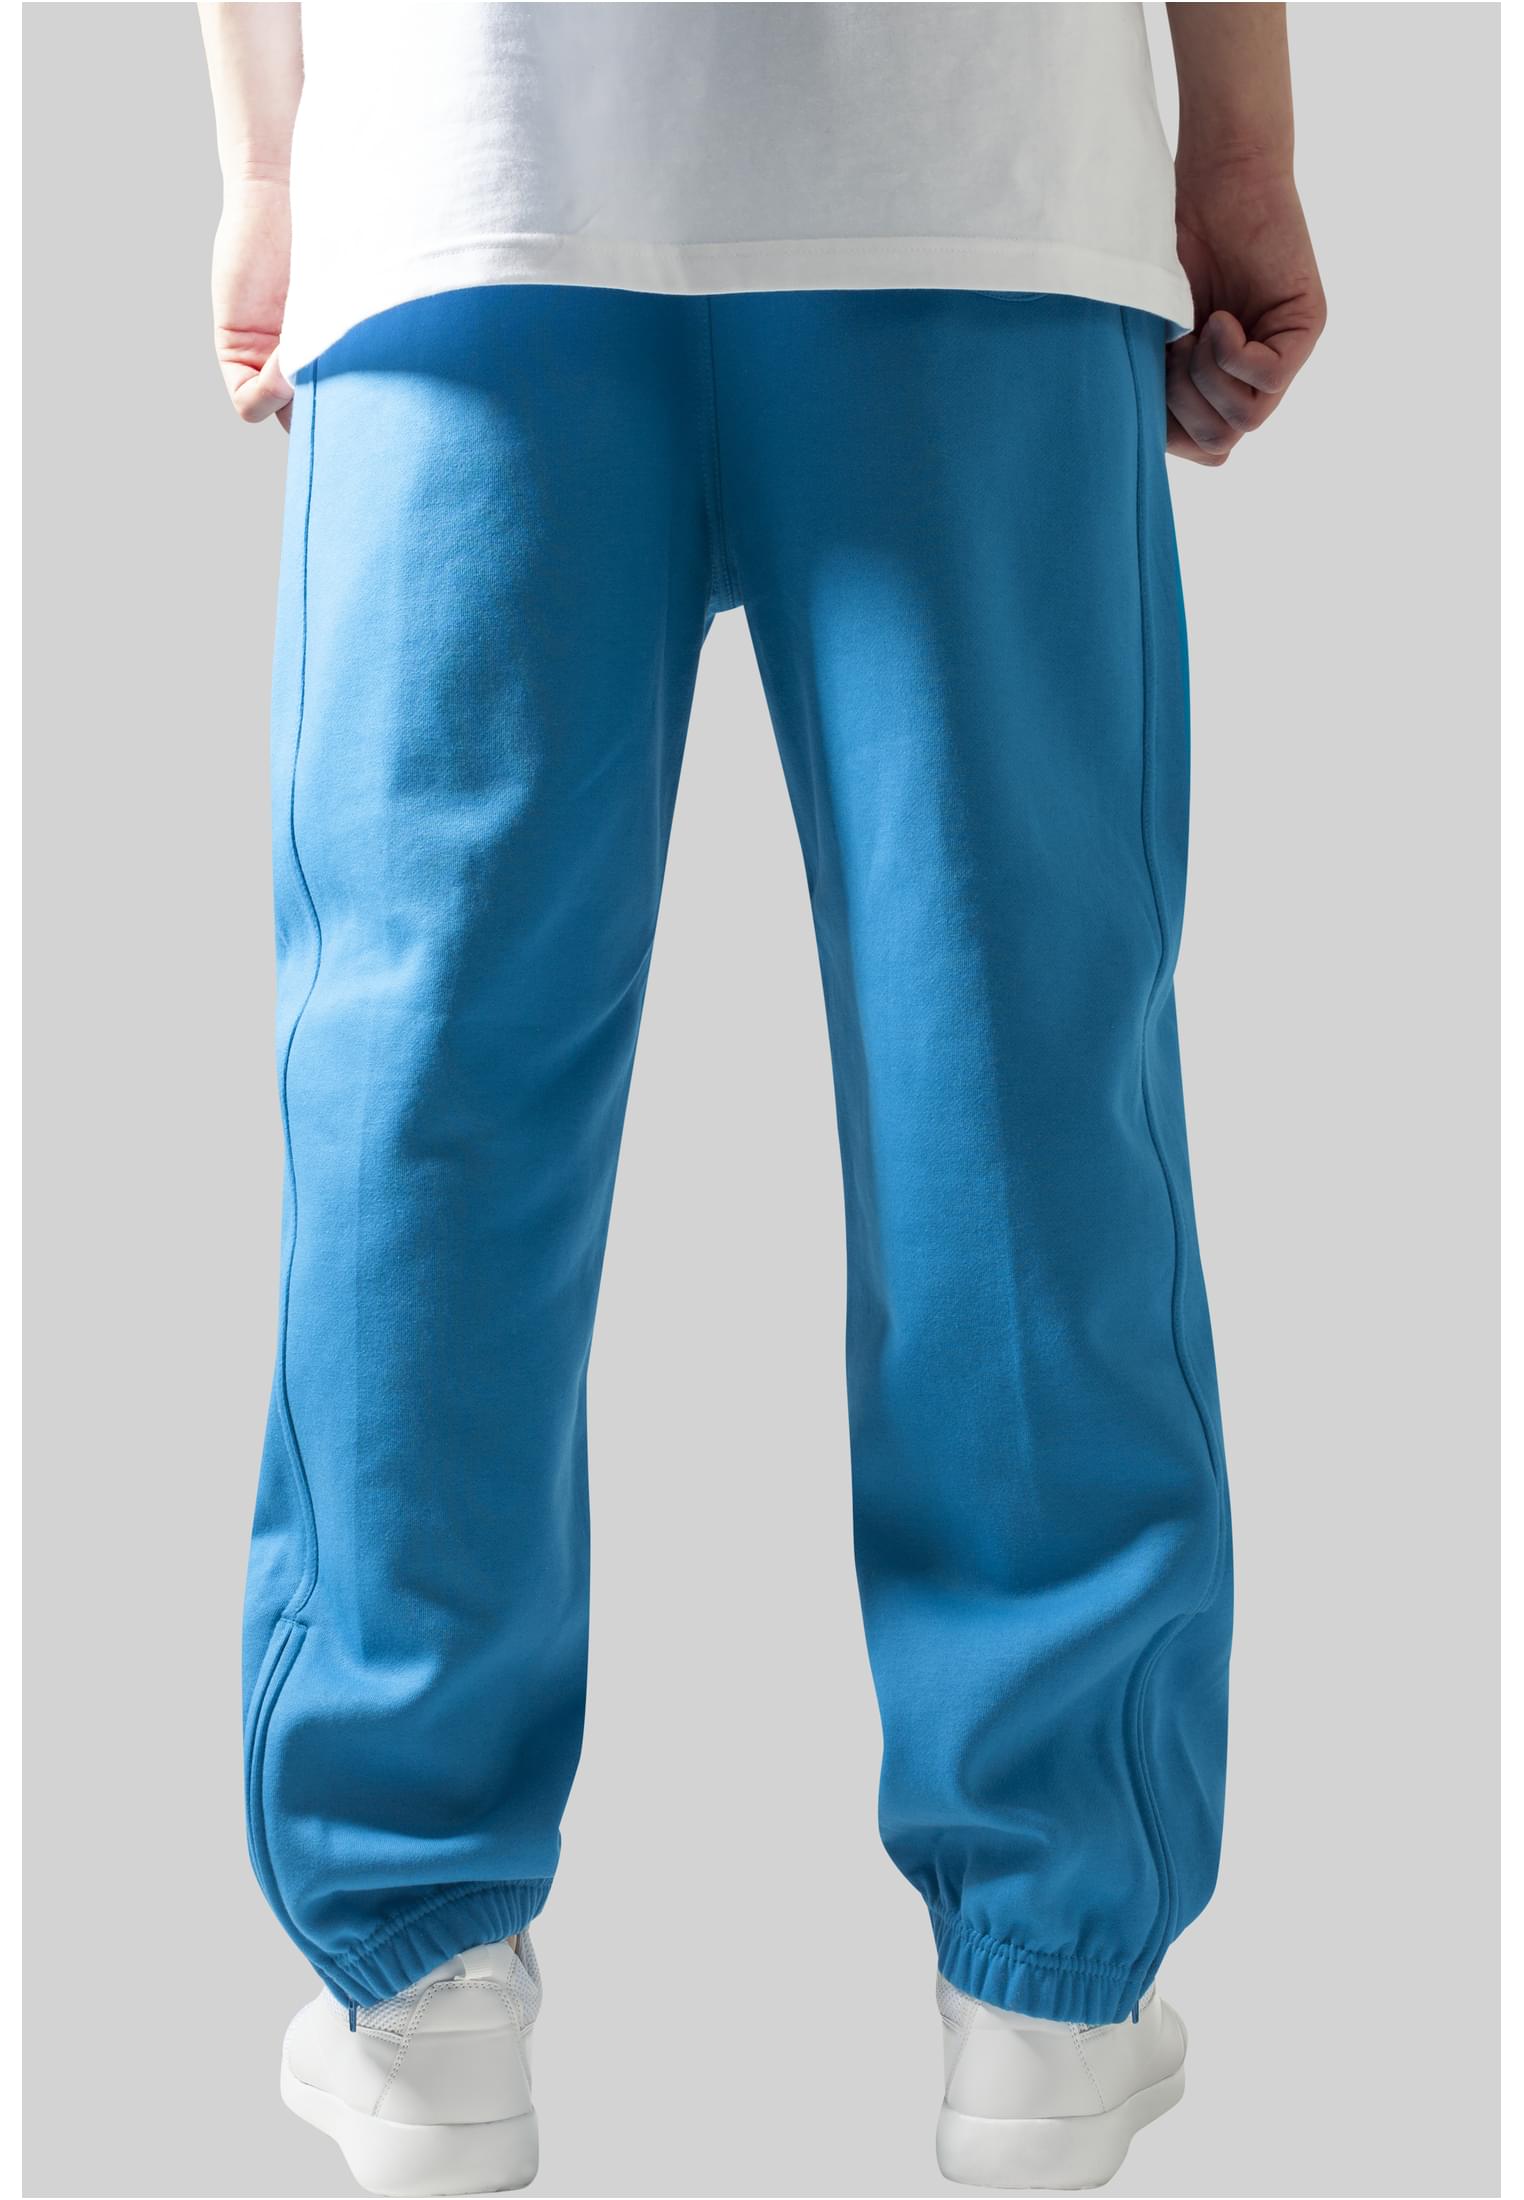 Sweatpants Sweatpants in Farbe turquoise